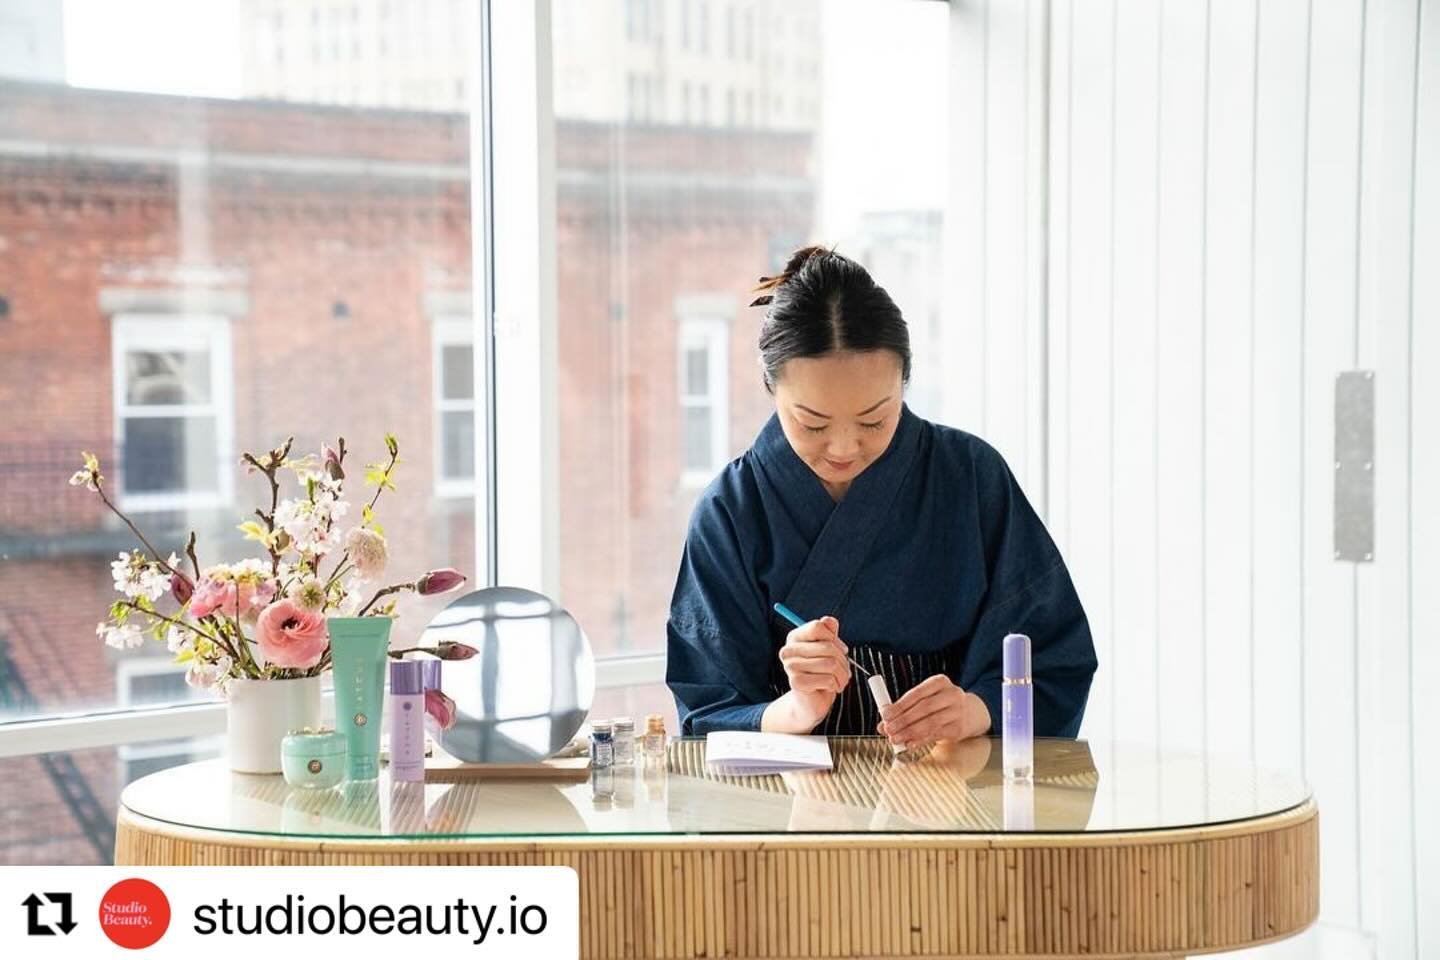 Was so pleasure to be a part of TATCHA tea party! Thank you again for having me @studiobeauty.io @tatcha 💖✨

#Repost @studiobeauty.io with @use.repost
・・・
STUDIO EVENTS: @tatcha and the Studio Beauty team held the Tatcha Tea Party, at the chic @w_lo